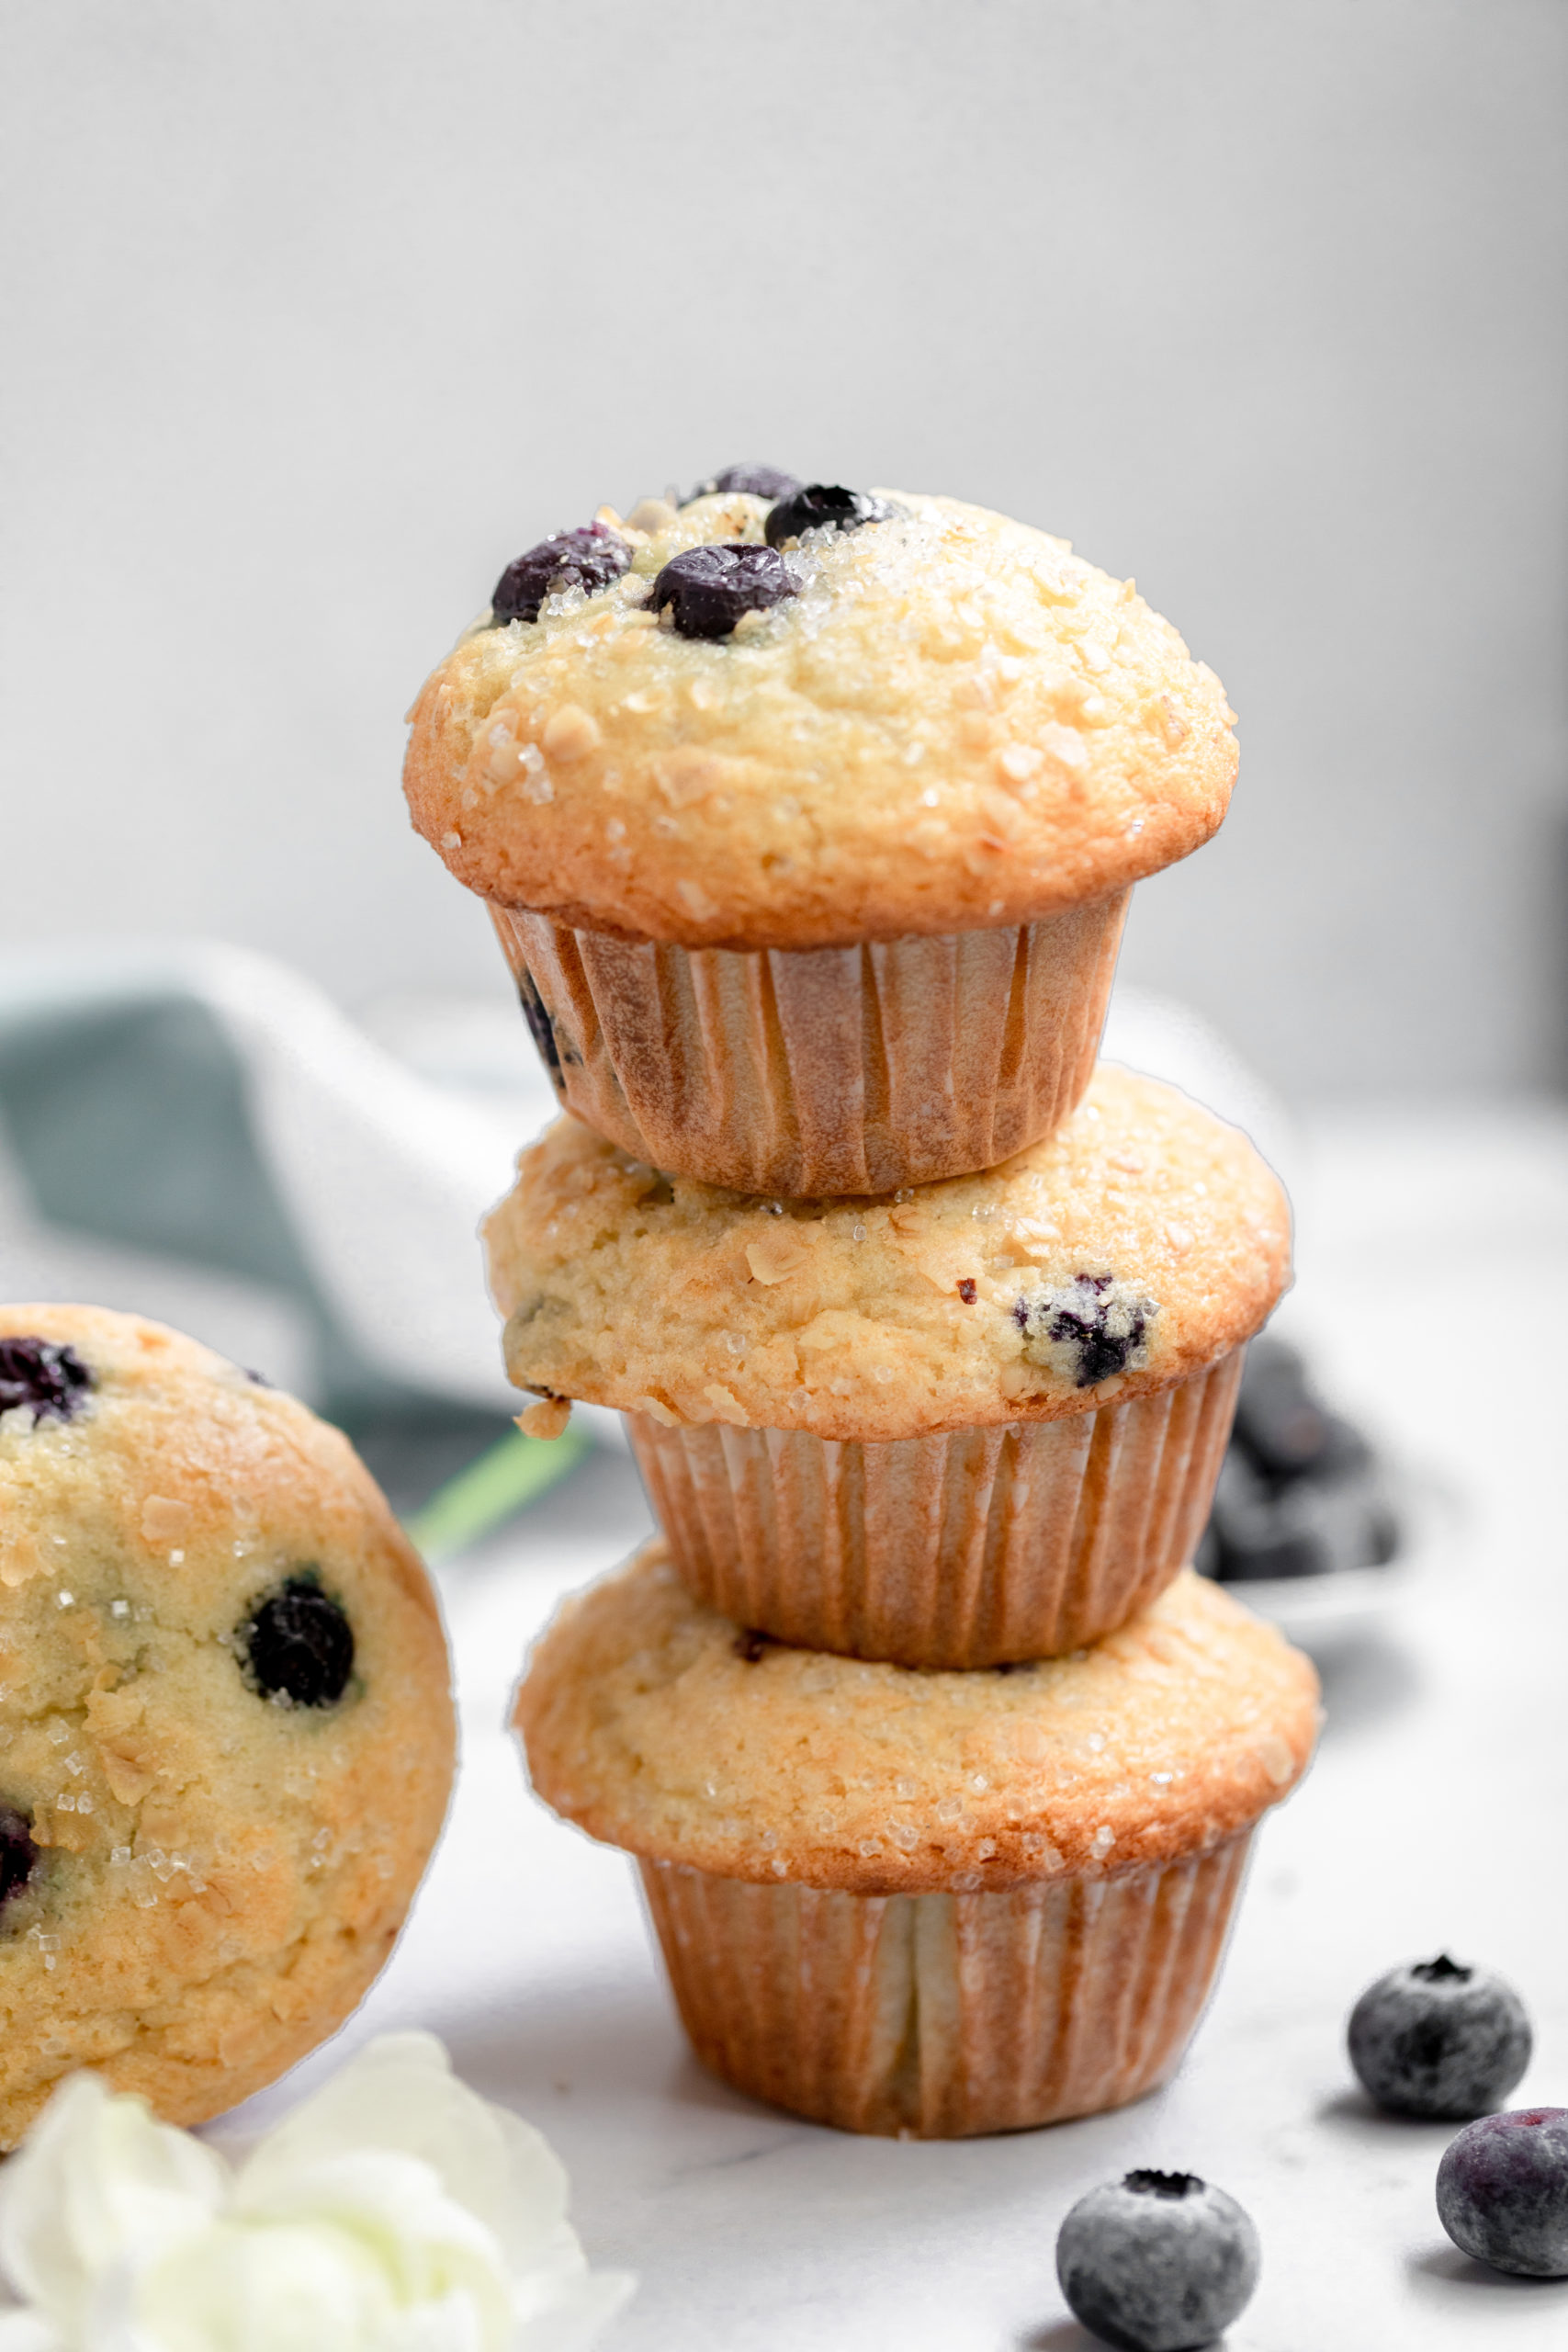 Blueberry muffins with fresh blueberries